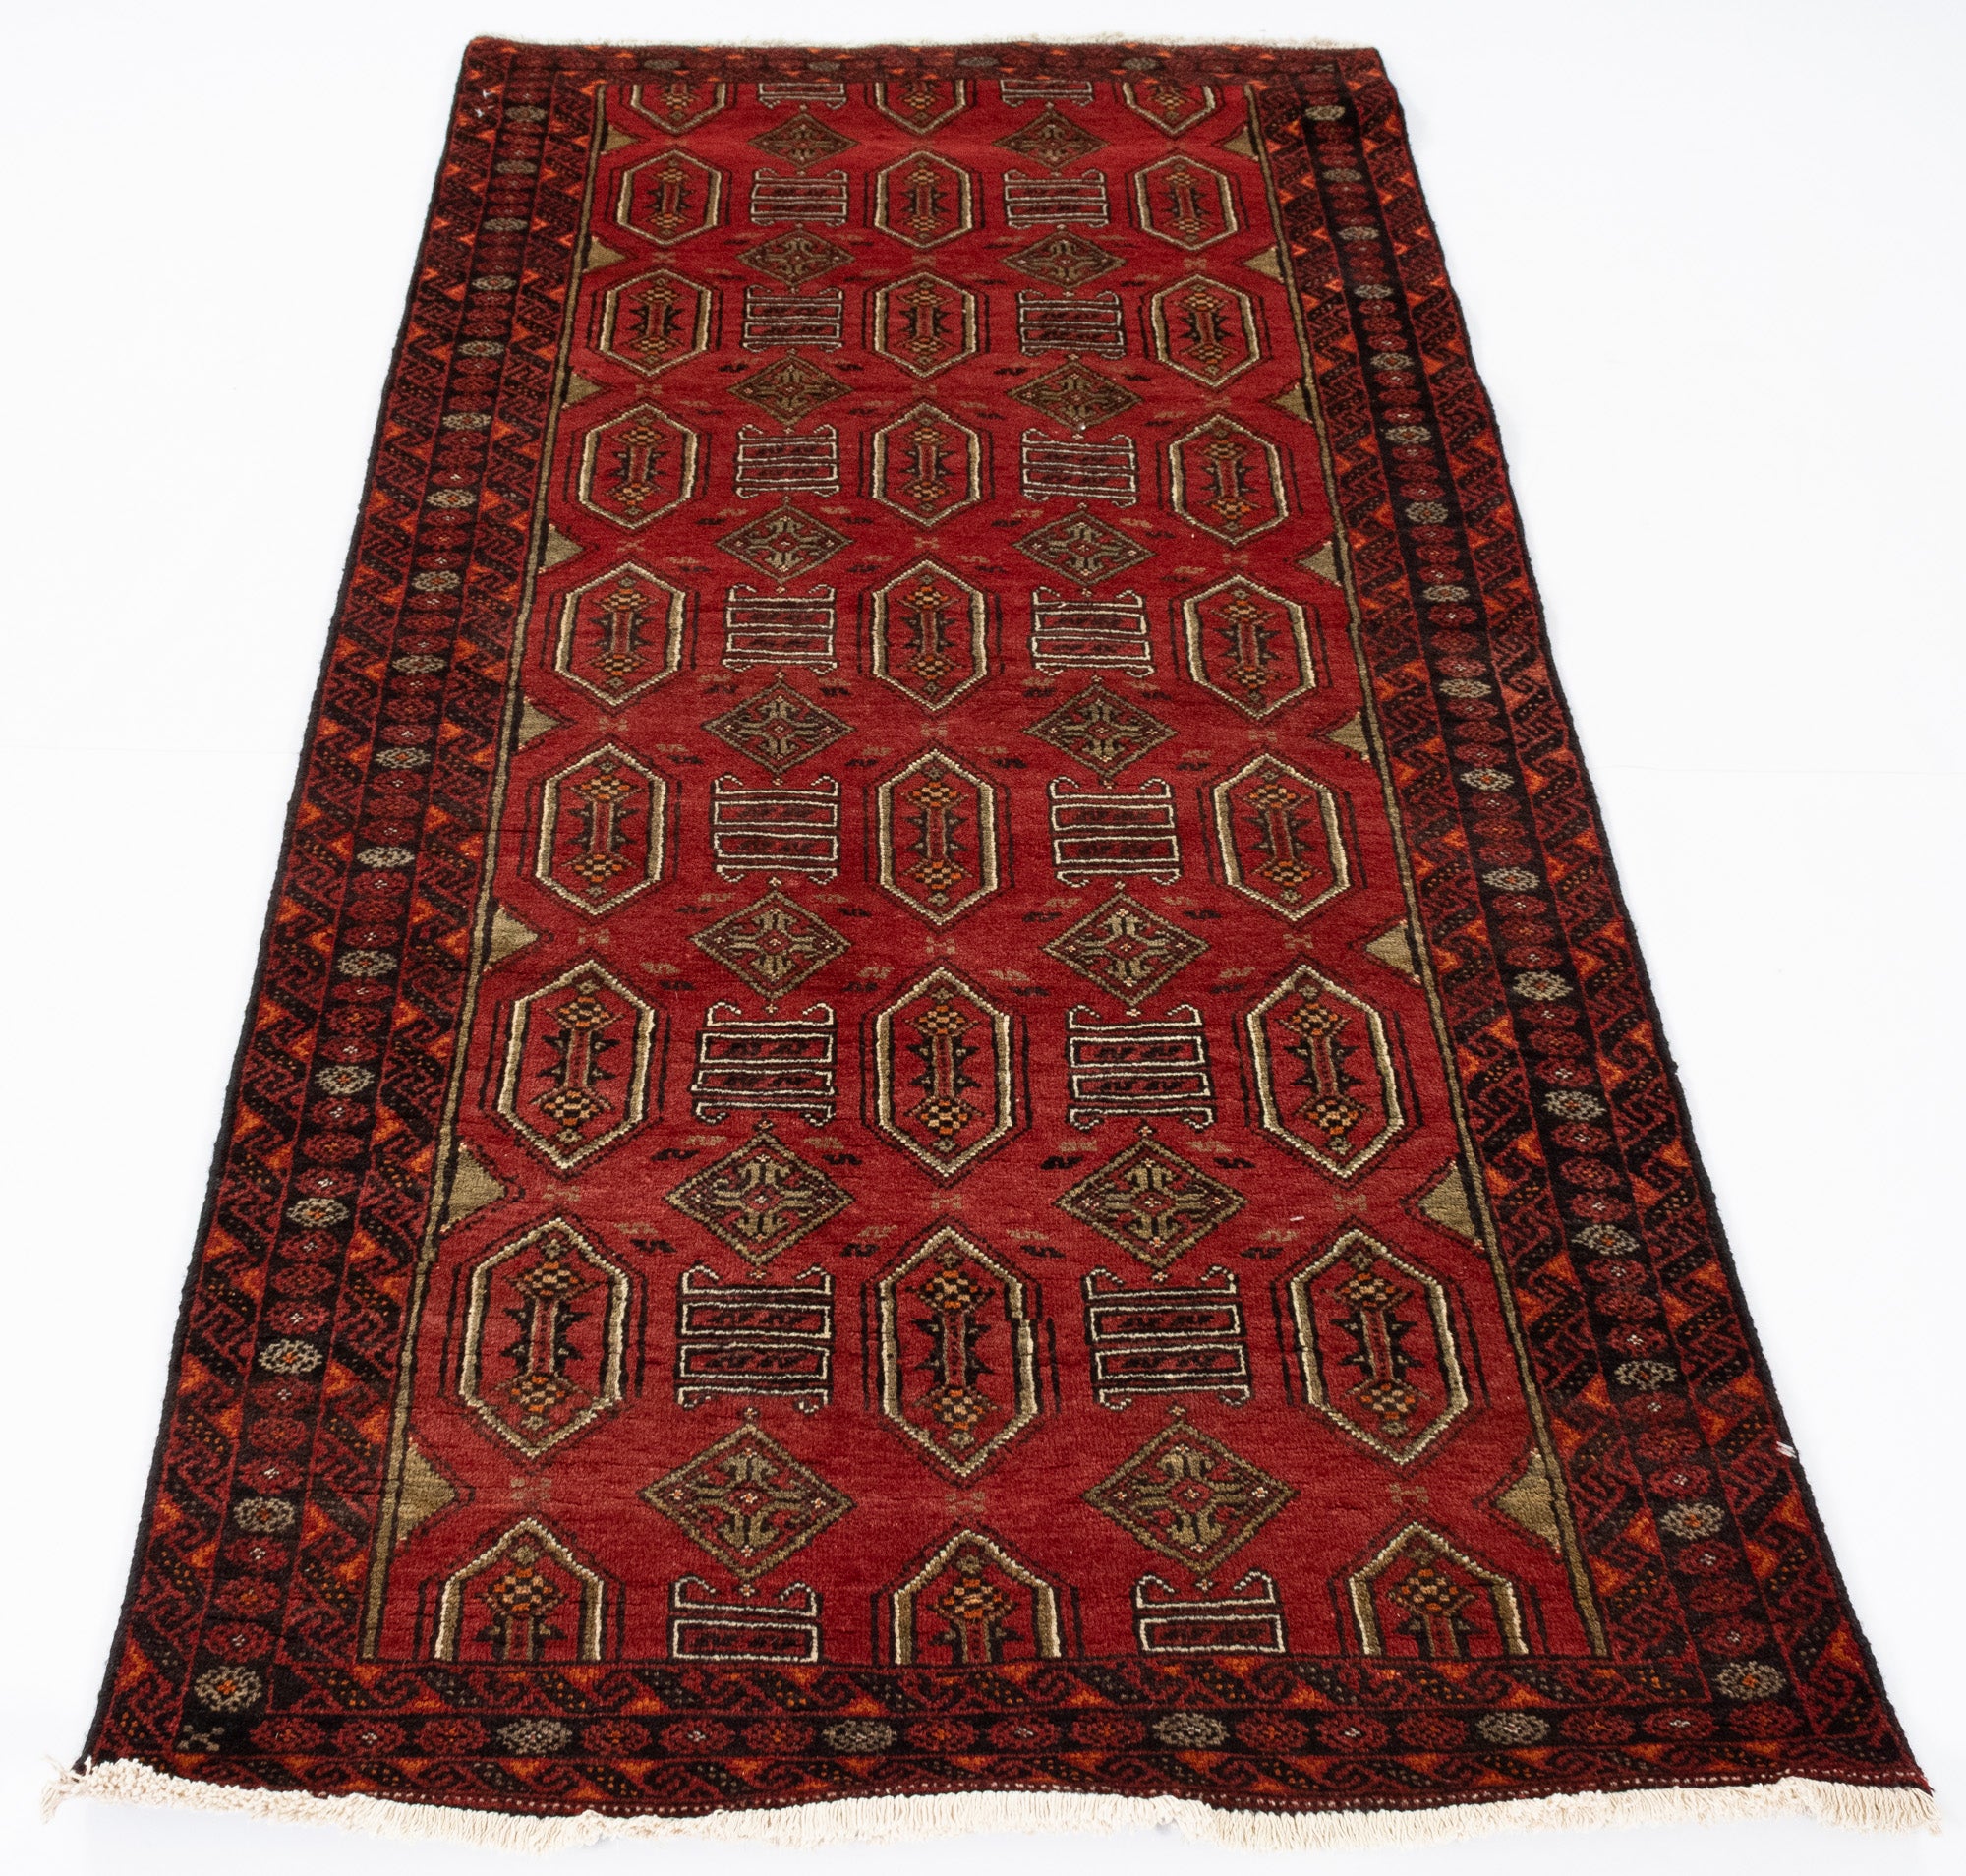 New Persian Balouch Rug <br> 3' 3 x 6' 10